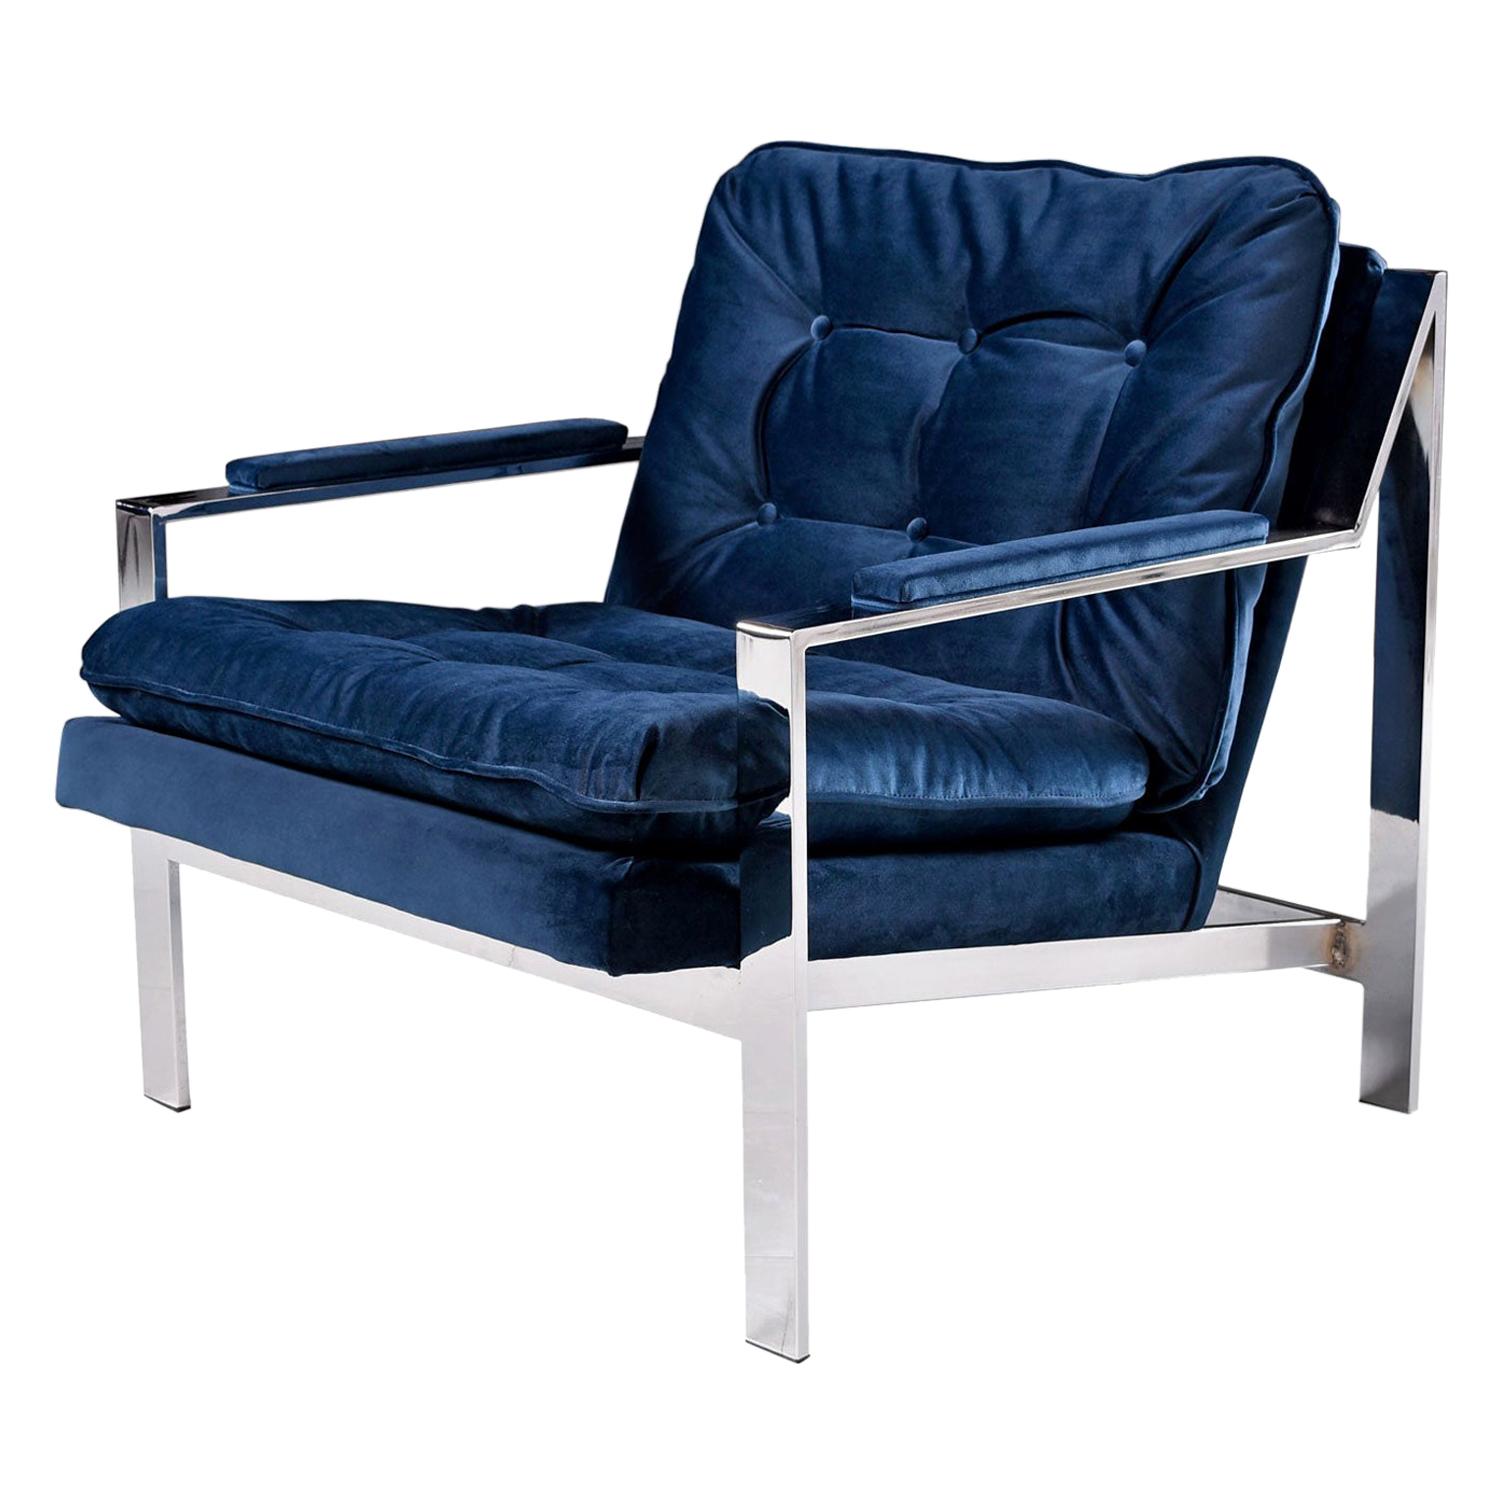 Restored, vintage flat bar chrome lounge chair designed by Cy Mann for Cy Mann Designs Ltd in the style of Milo Baughman. The lounge chair has been updated with luxurious, buttery soft navy blue / midnight blue velvet fabric by our in-house